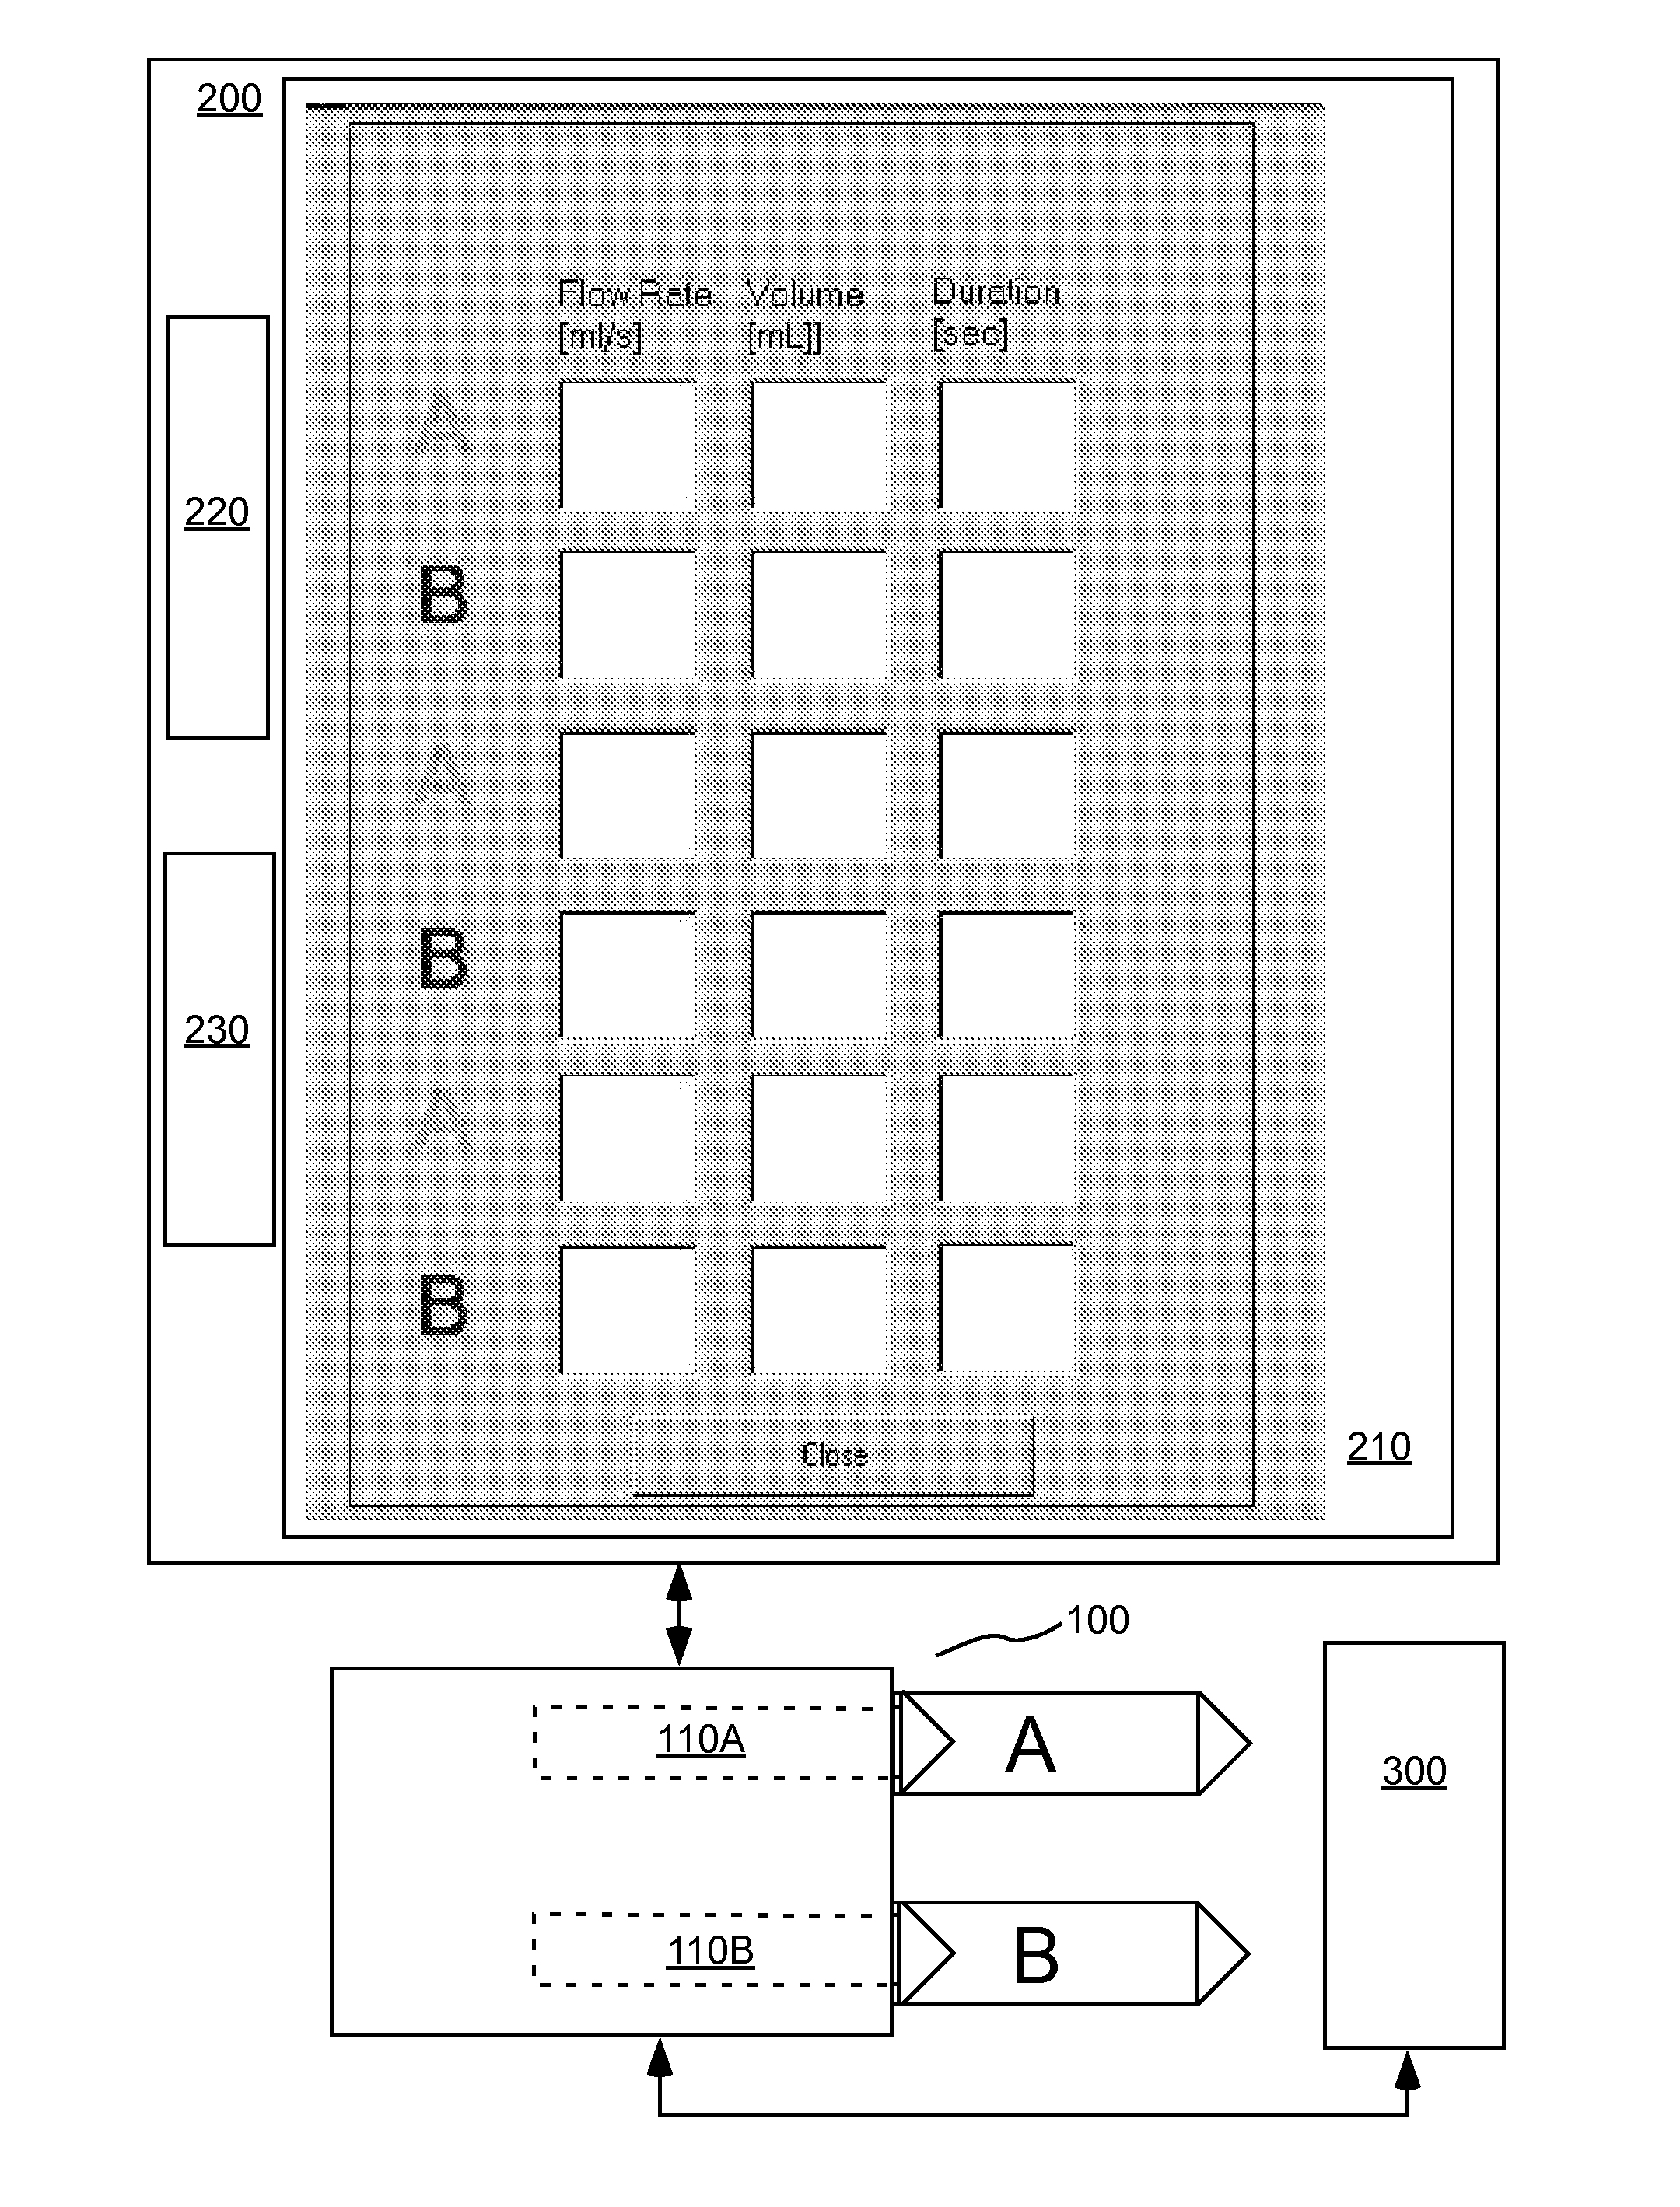 System And Apparatus For Modeling Pressures Generated During An Injection Procedure